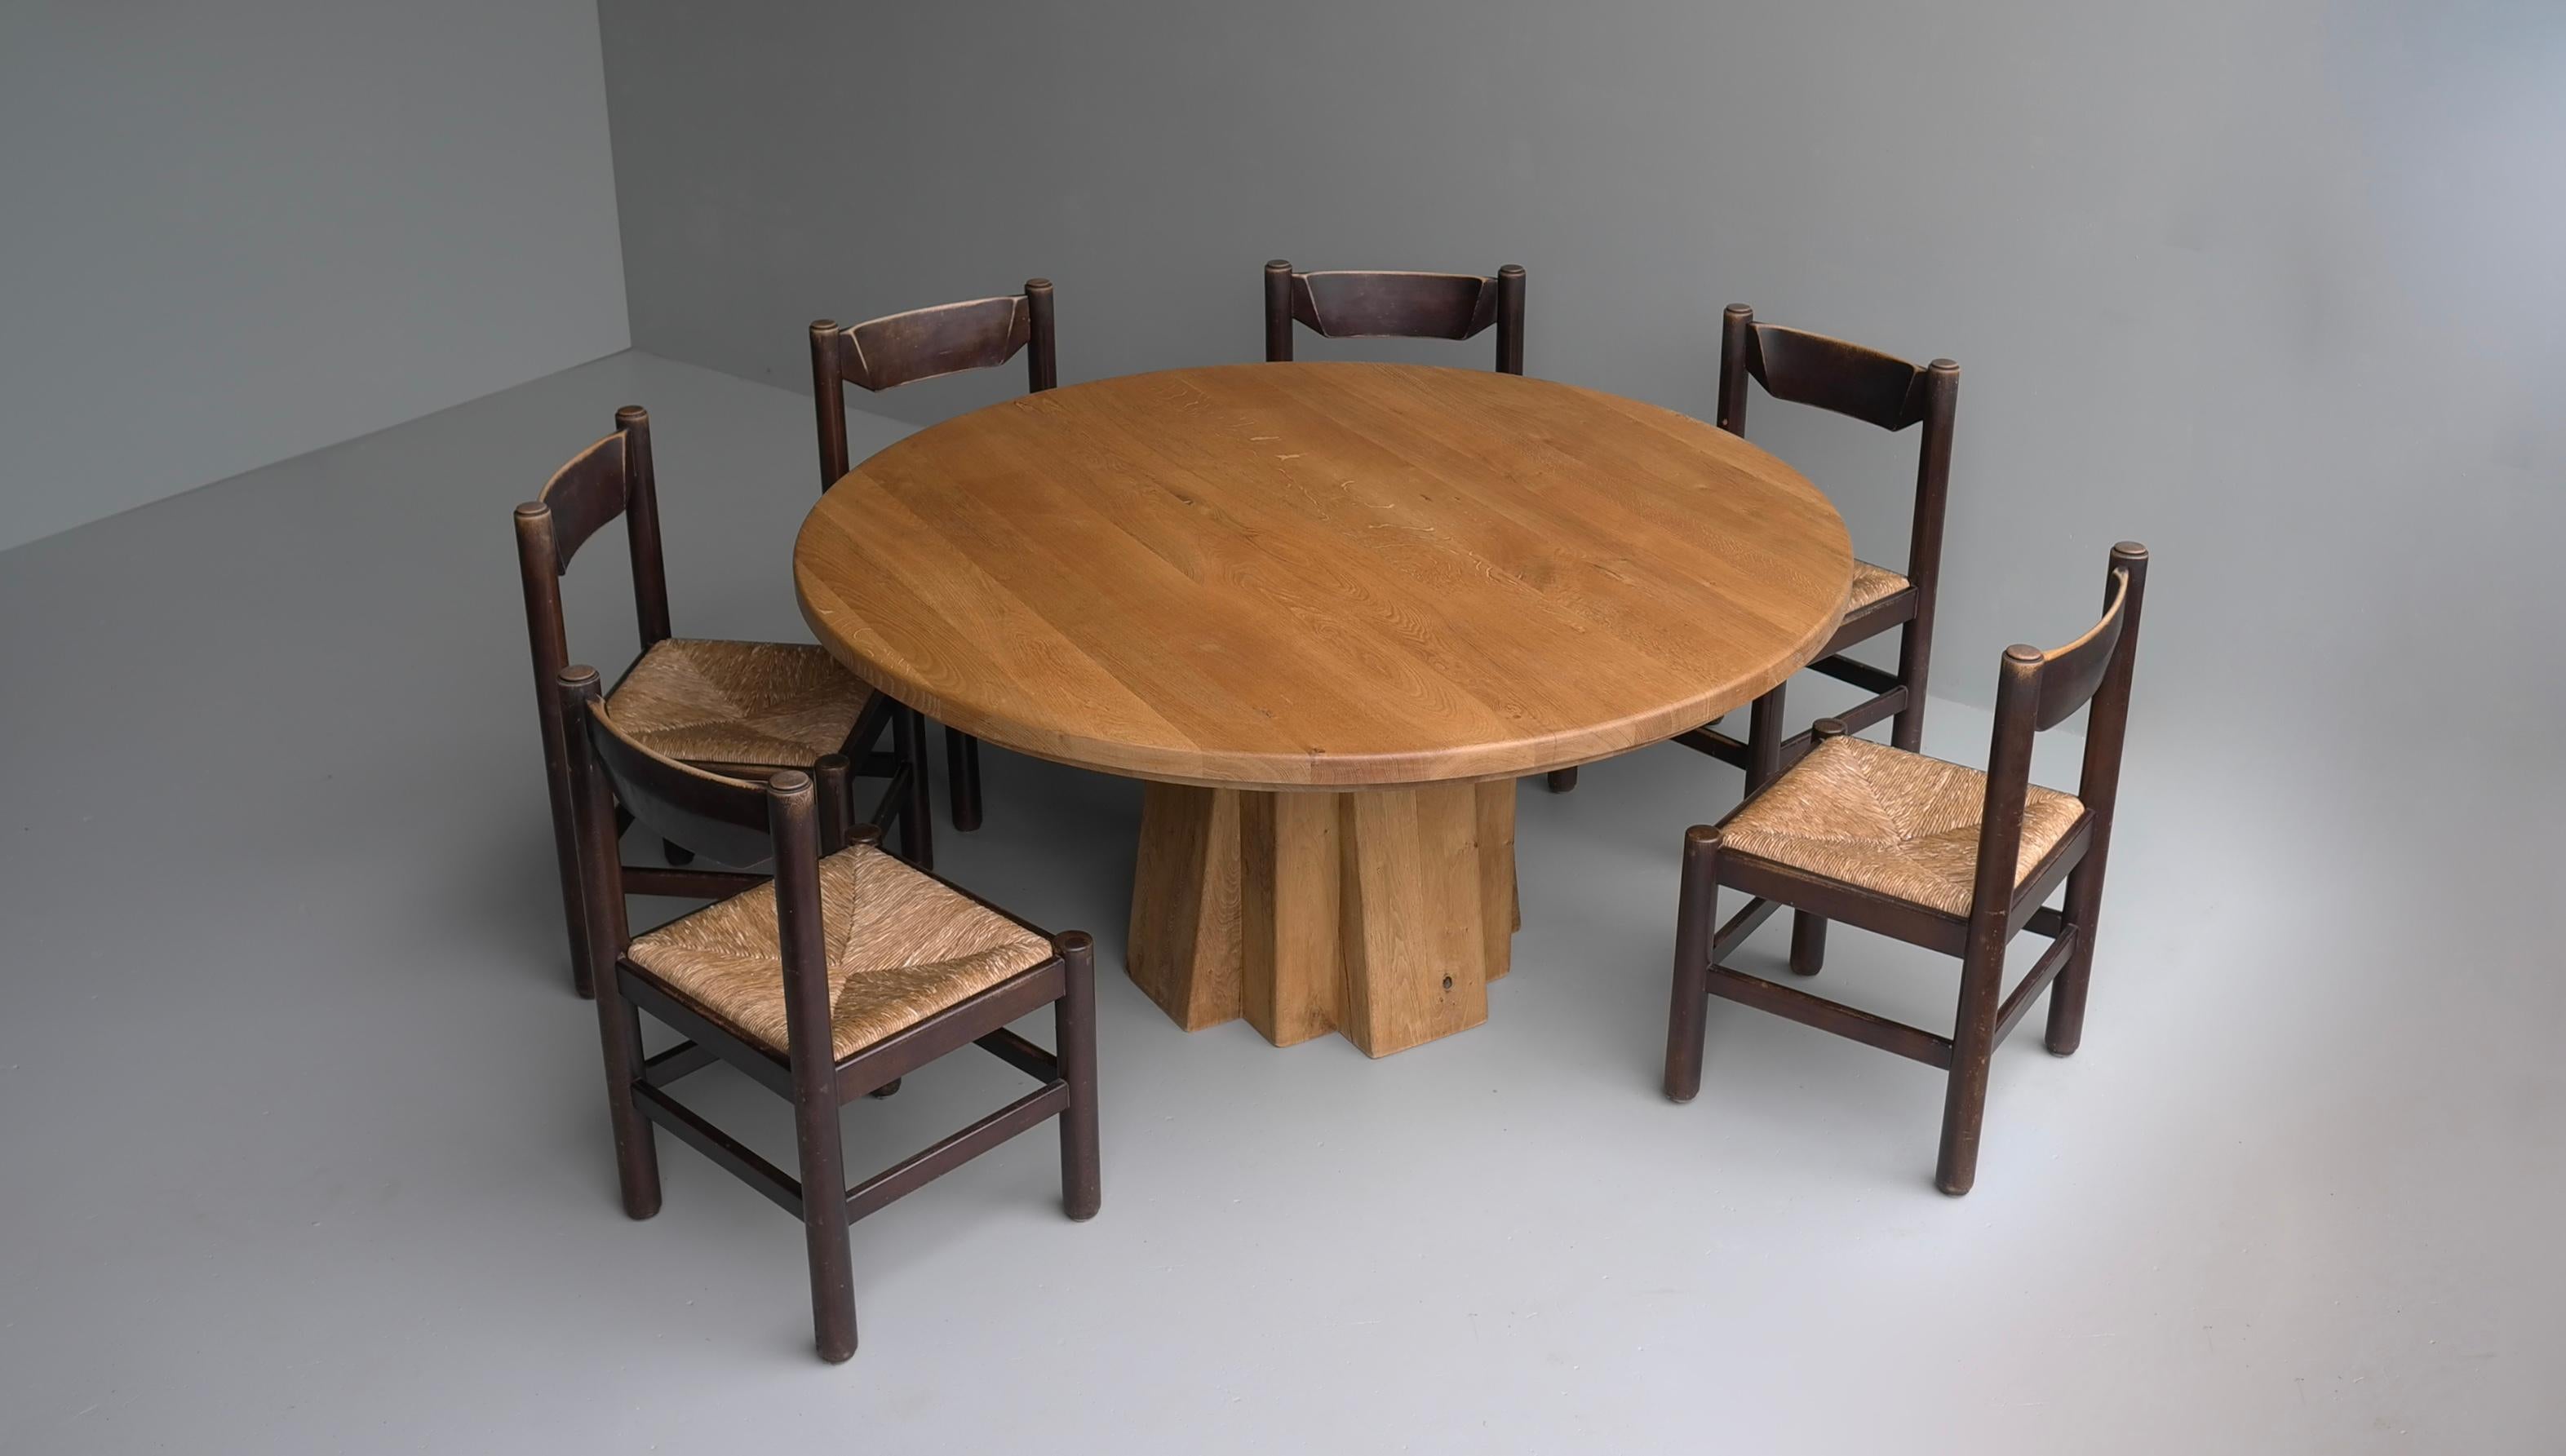 This very large round table is made from solid oak with a unique sculptural carved base. Very Heavy and solid piece. The chairs are made from solid wood, heavy and robust with rush seats. These chairs have a fine patina with marks of usage and they